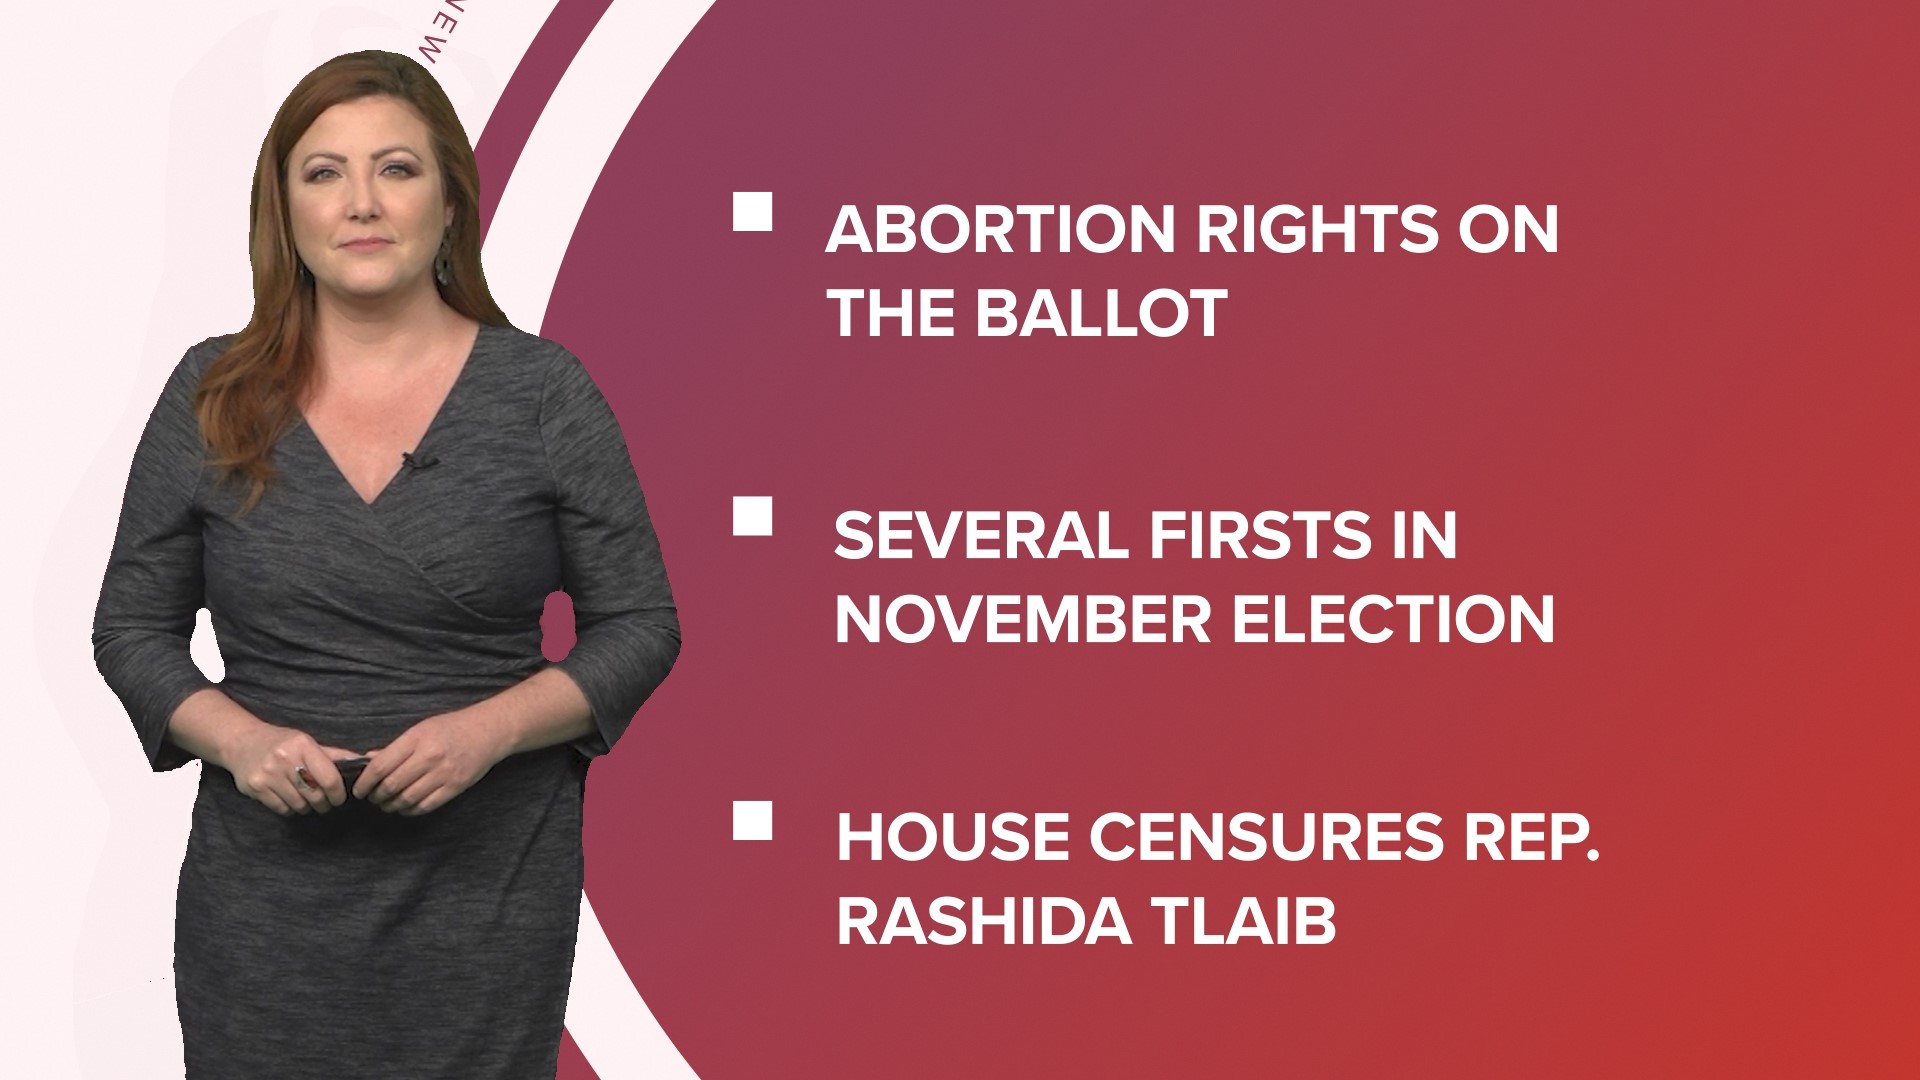 A look at what is happening in the news from abortion rights winning in several elections to Patrick Dempsey finally winning People's Sexiest Man Alive.